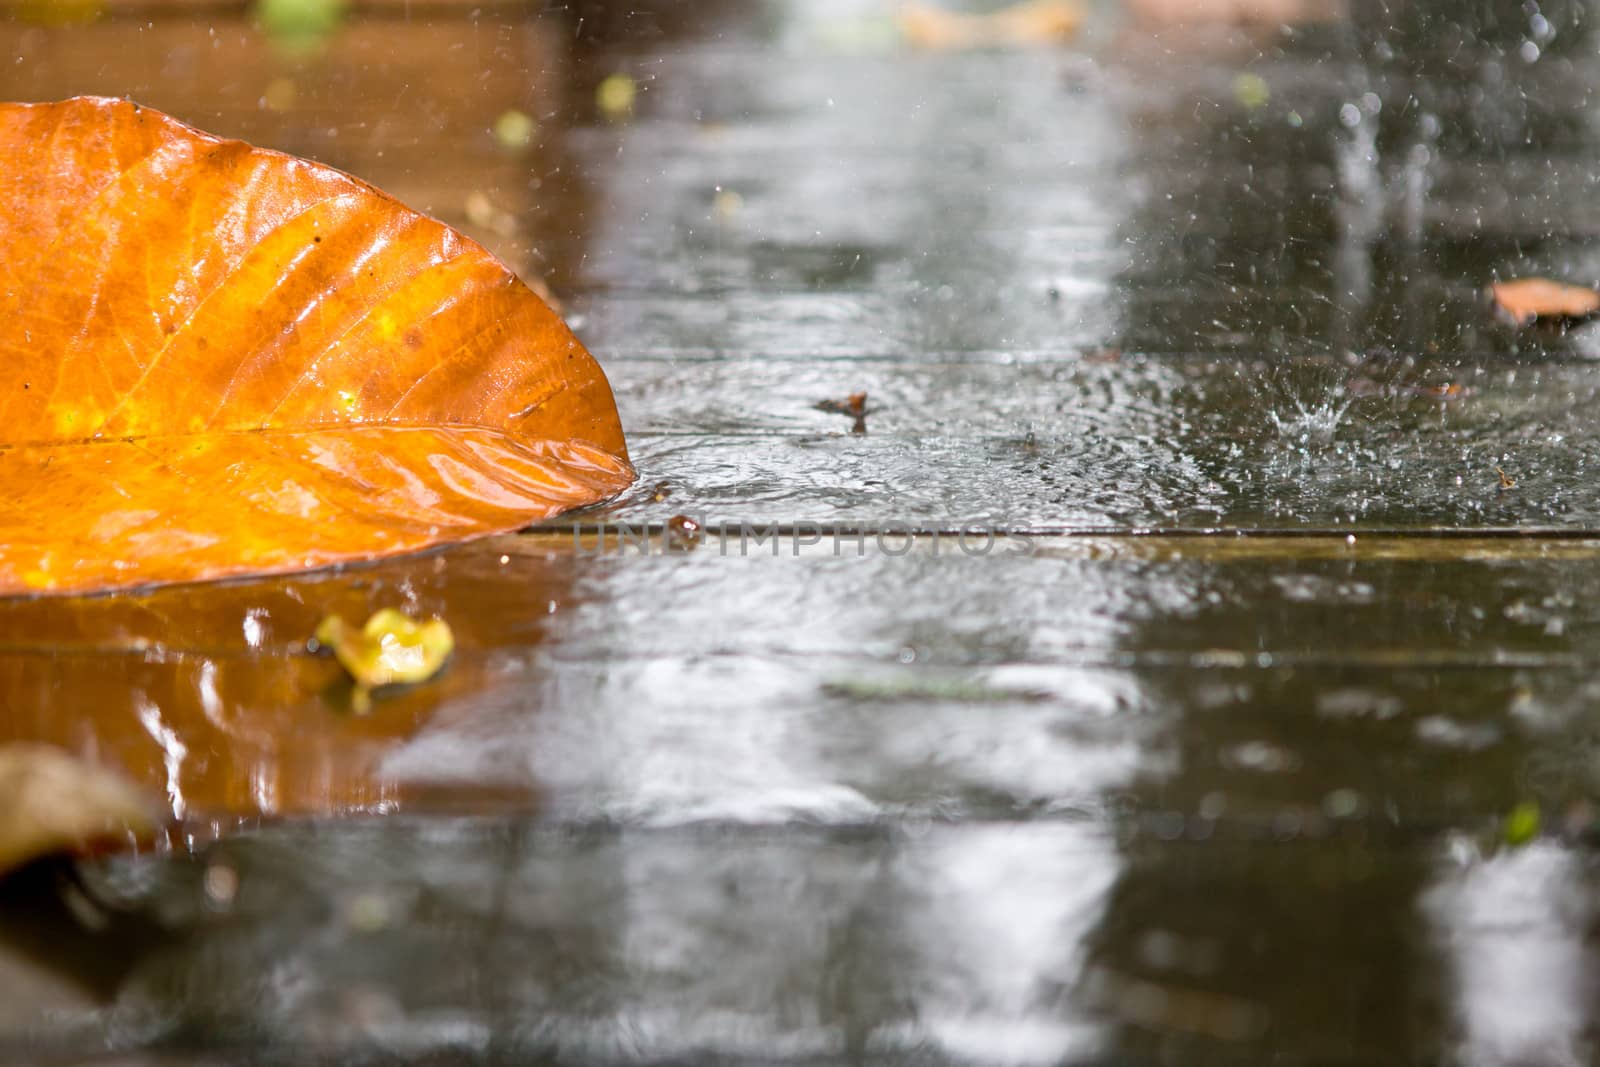 Beautiful colourful orange autumn leaf lying outdoors on a wet concrete surface in rain